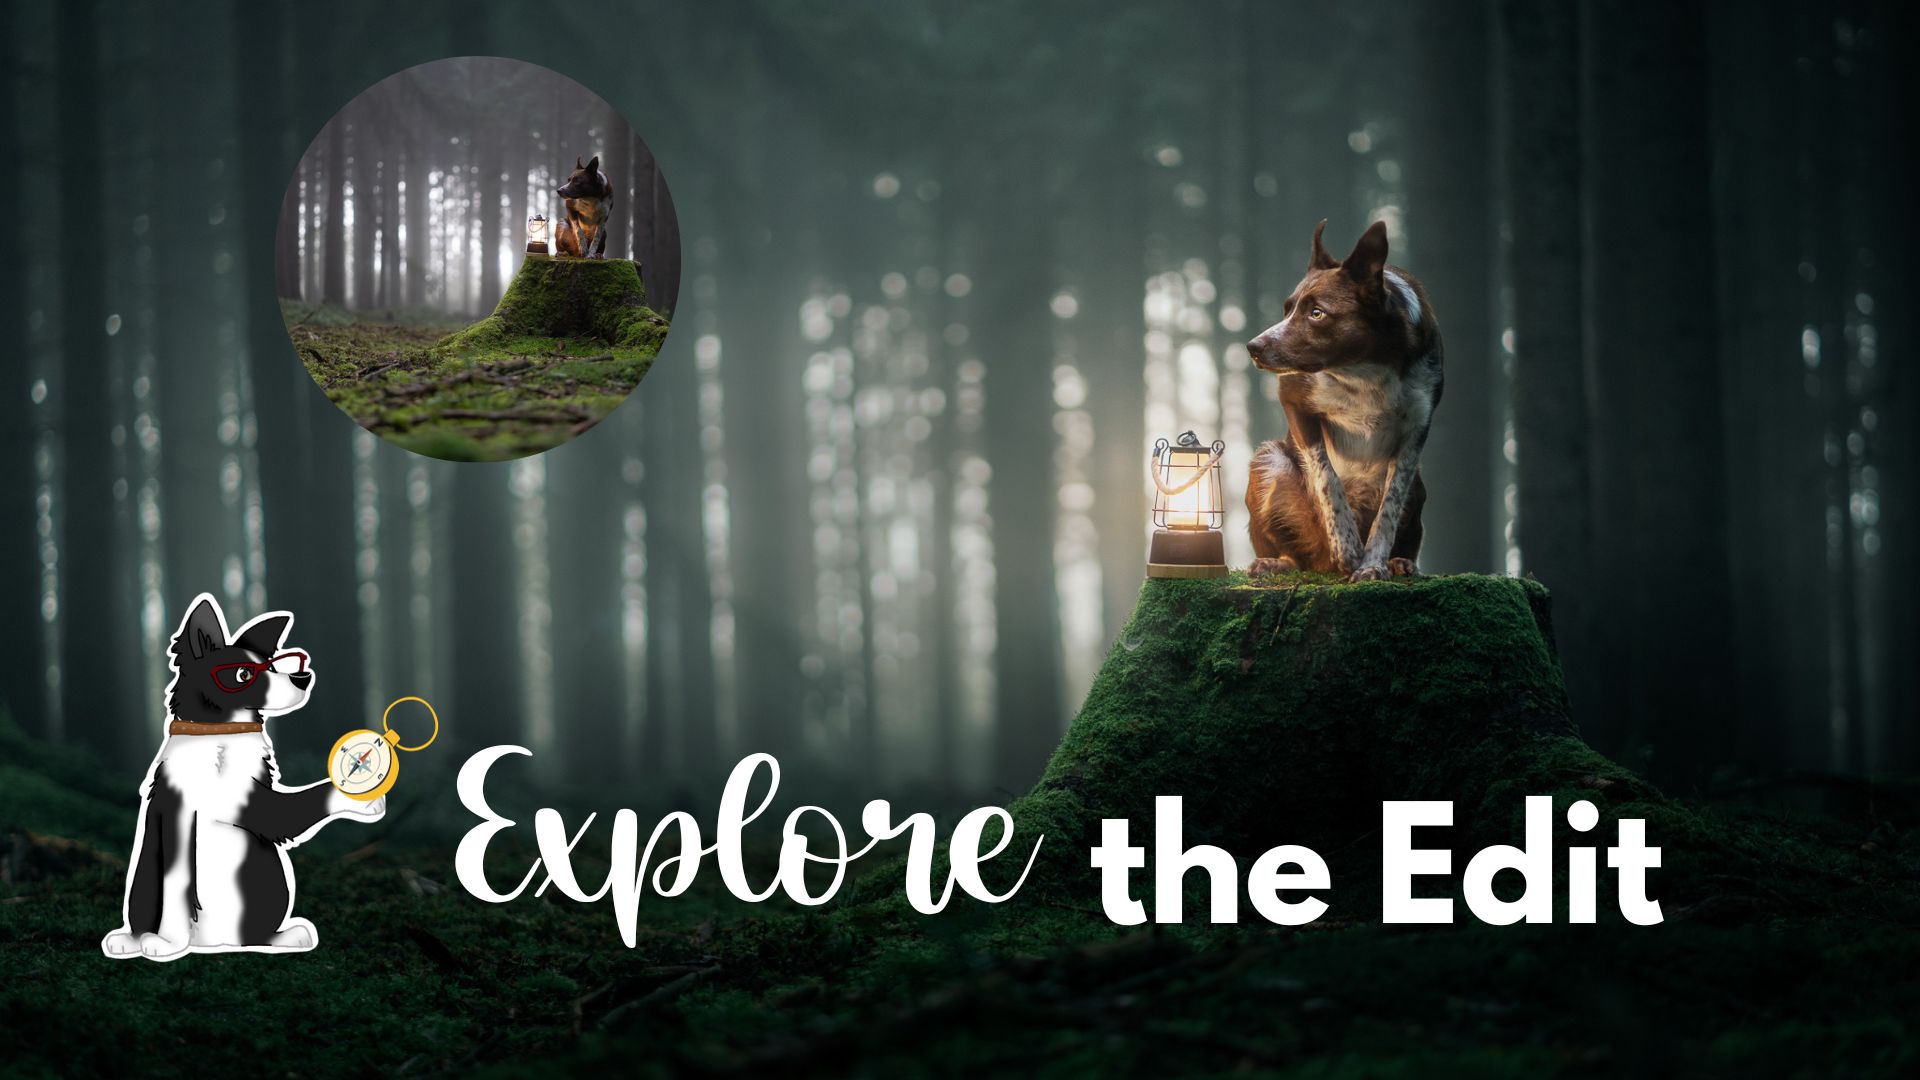 A foggy journey through the woods with the words explore the edit.